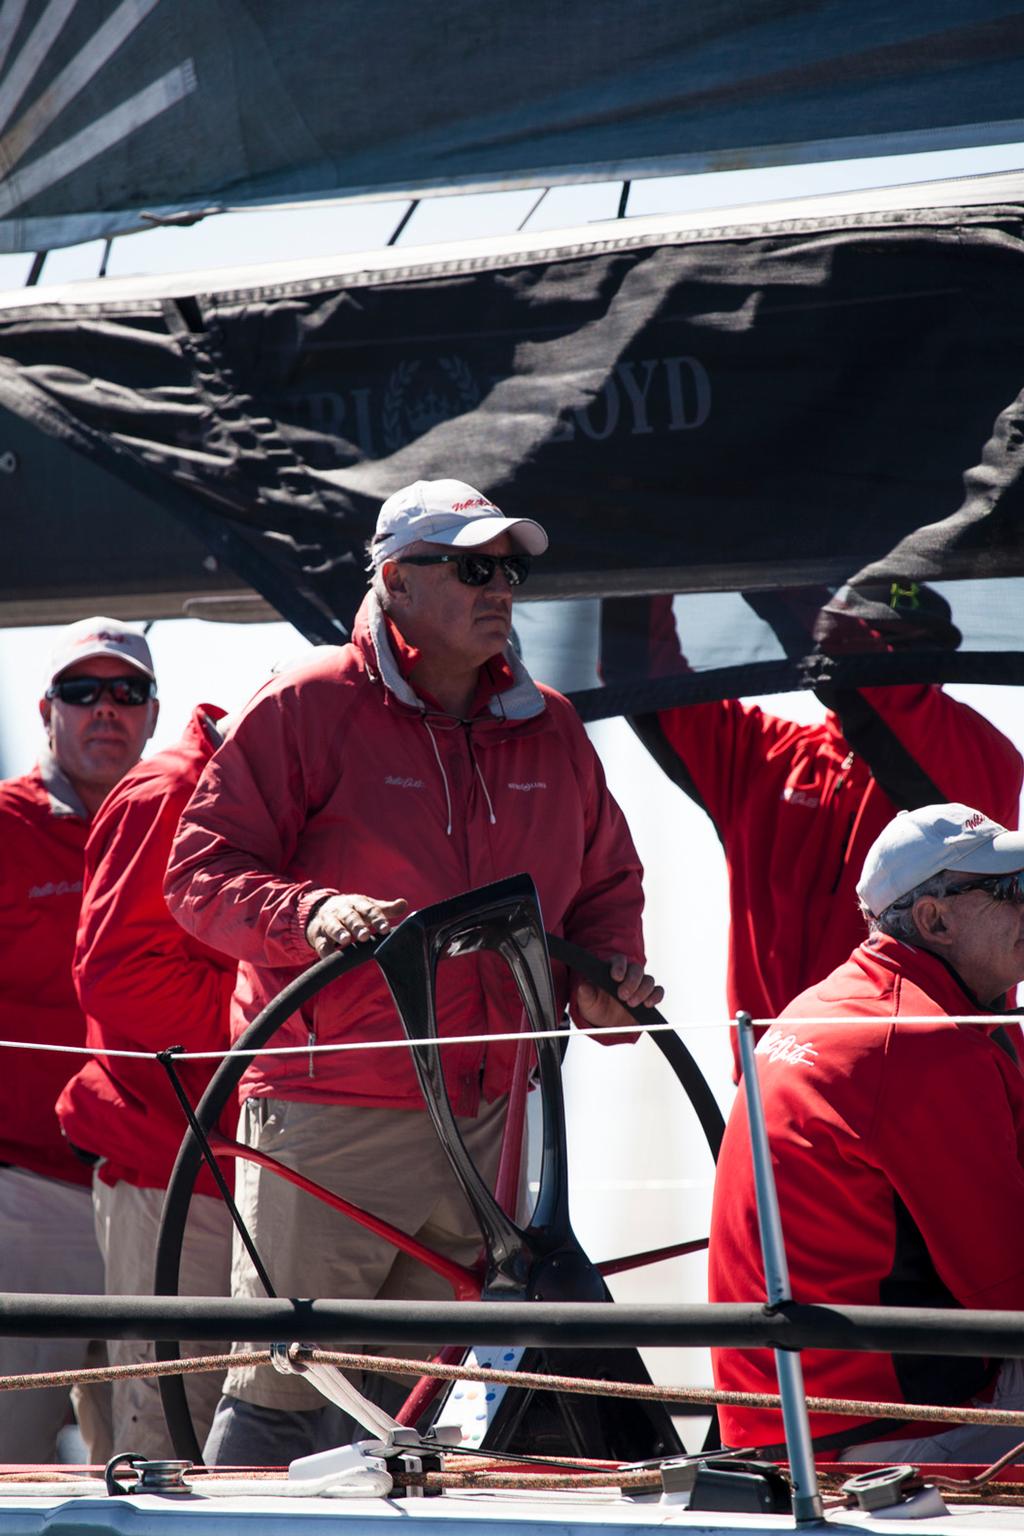 Iain Murray at the helm of WOXI - Brisbane to Keppel Tropical Yacht Race 2014 © Andrew Gough